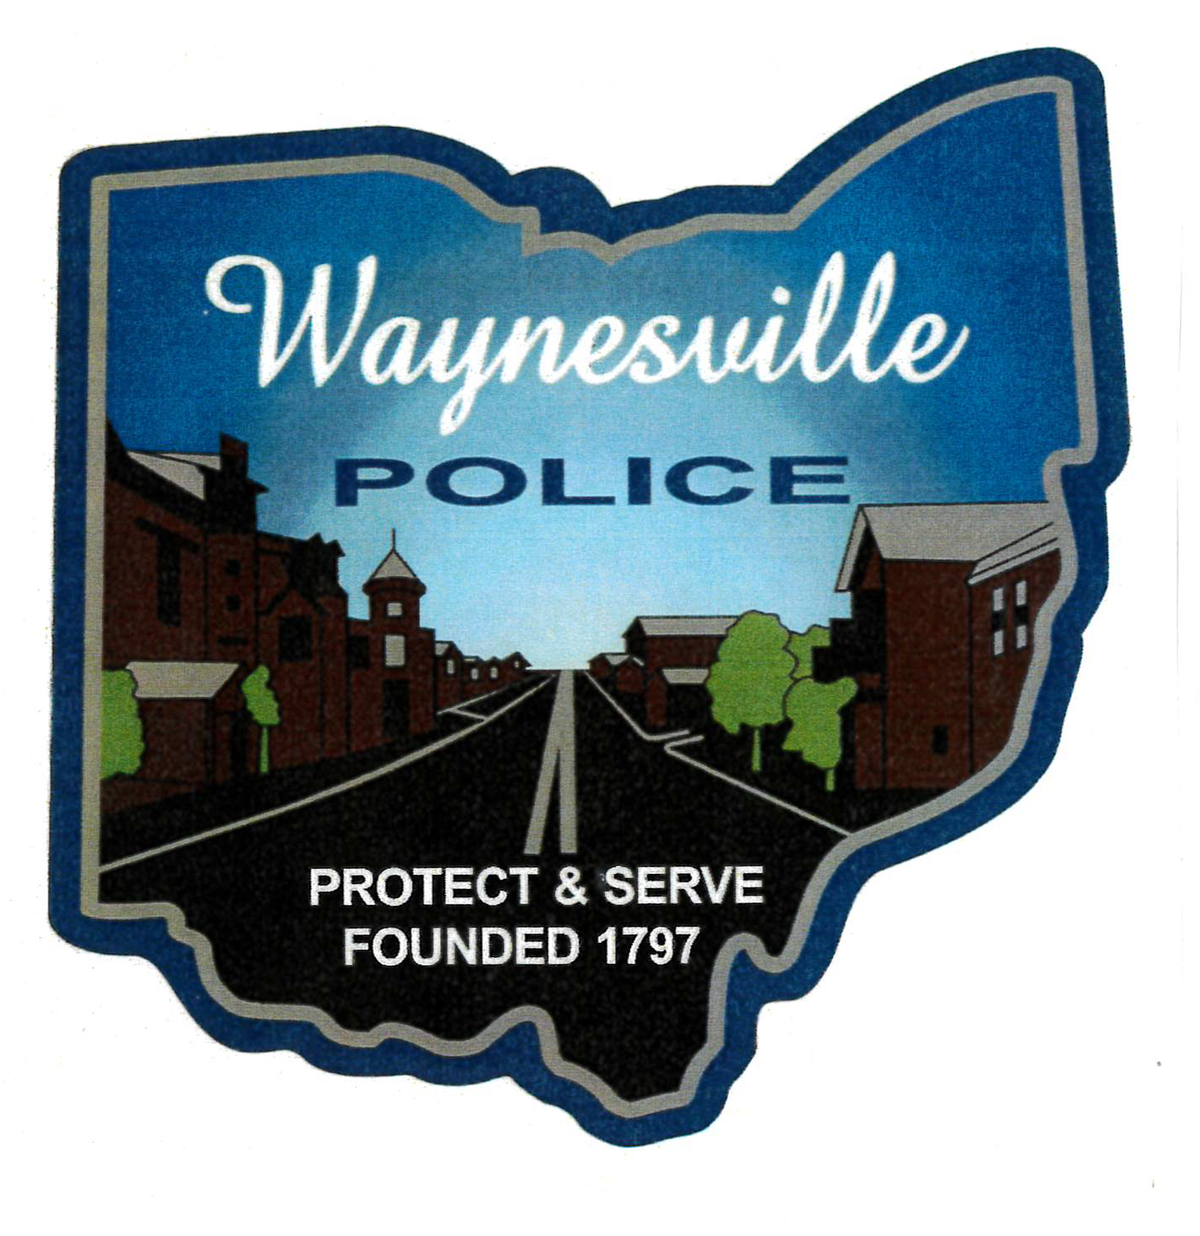 Image of Waynesville Police Patch